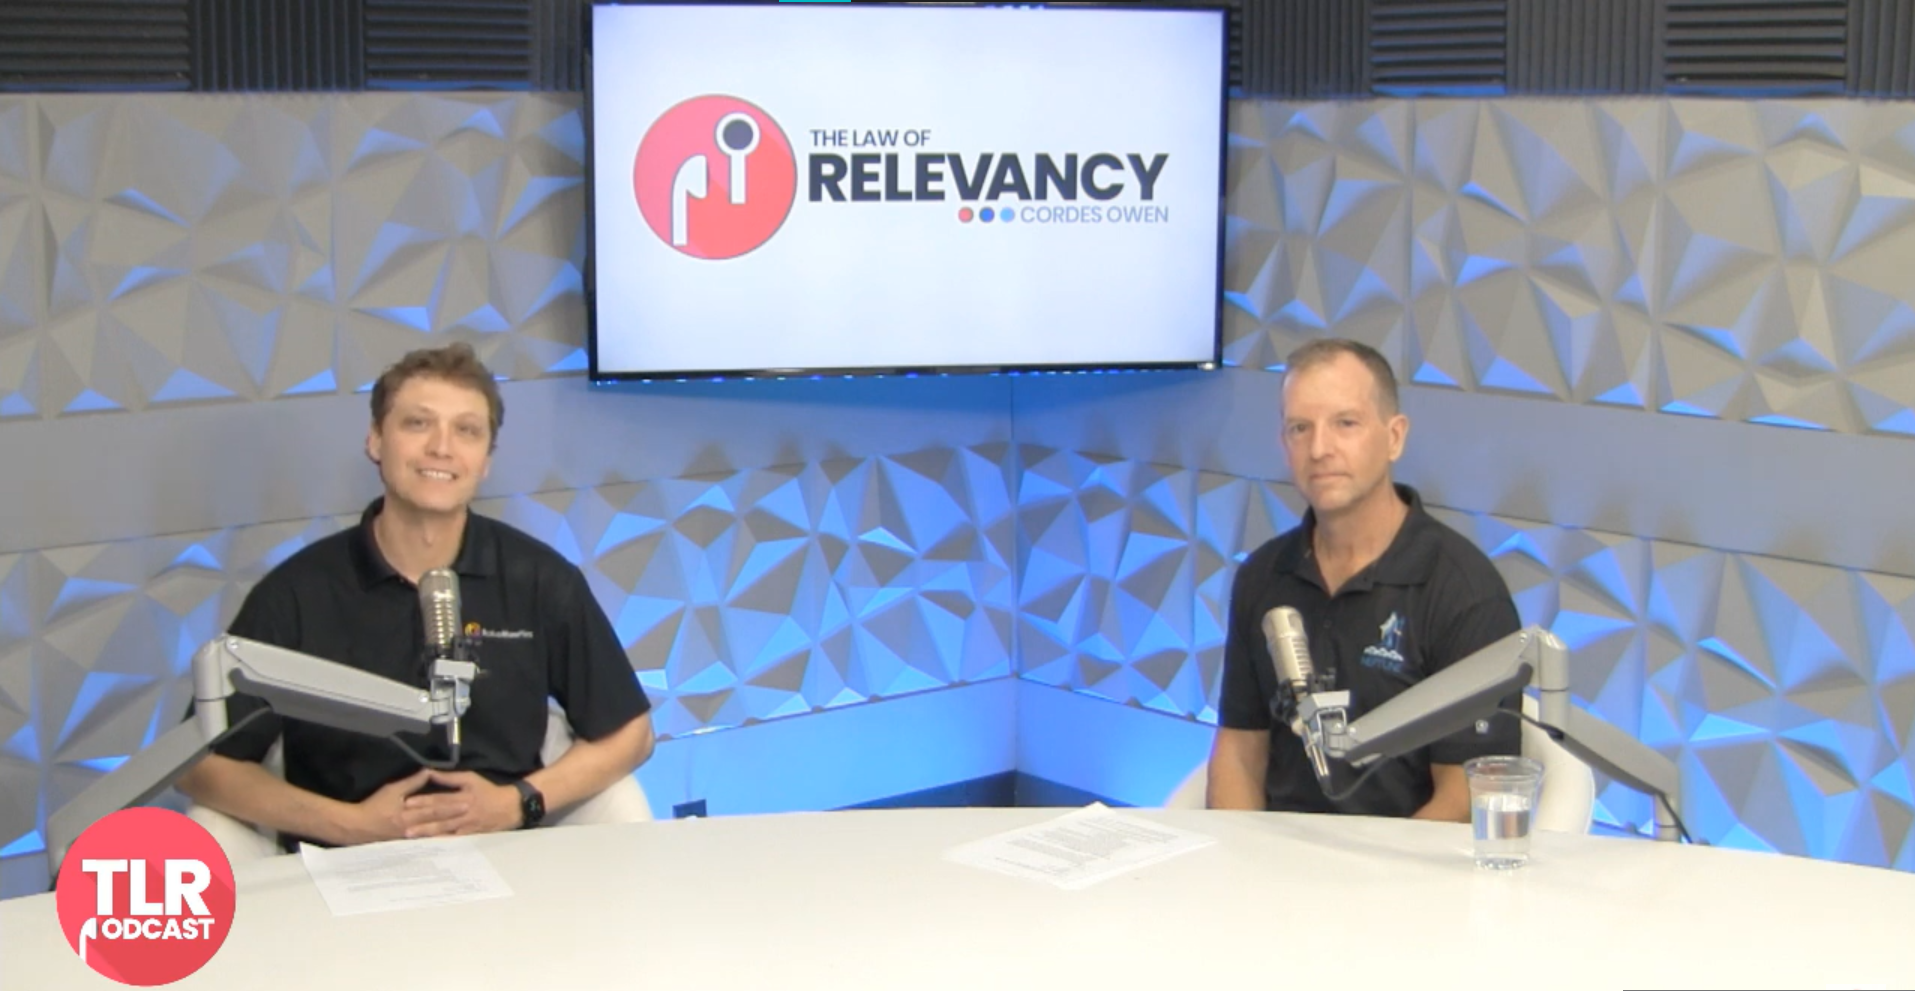 Episode 5 – The Law of Relevancy with Jim Albert